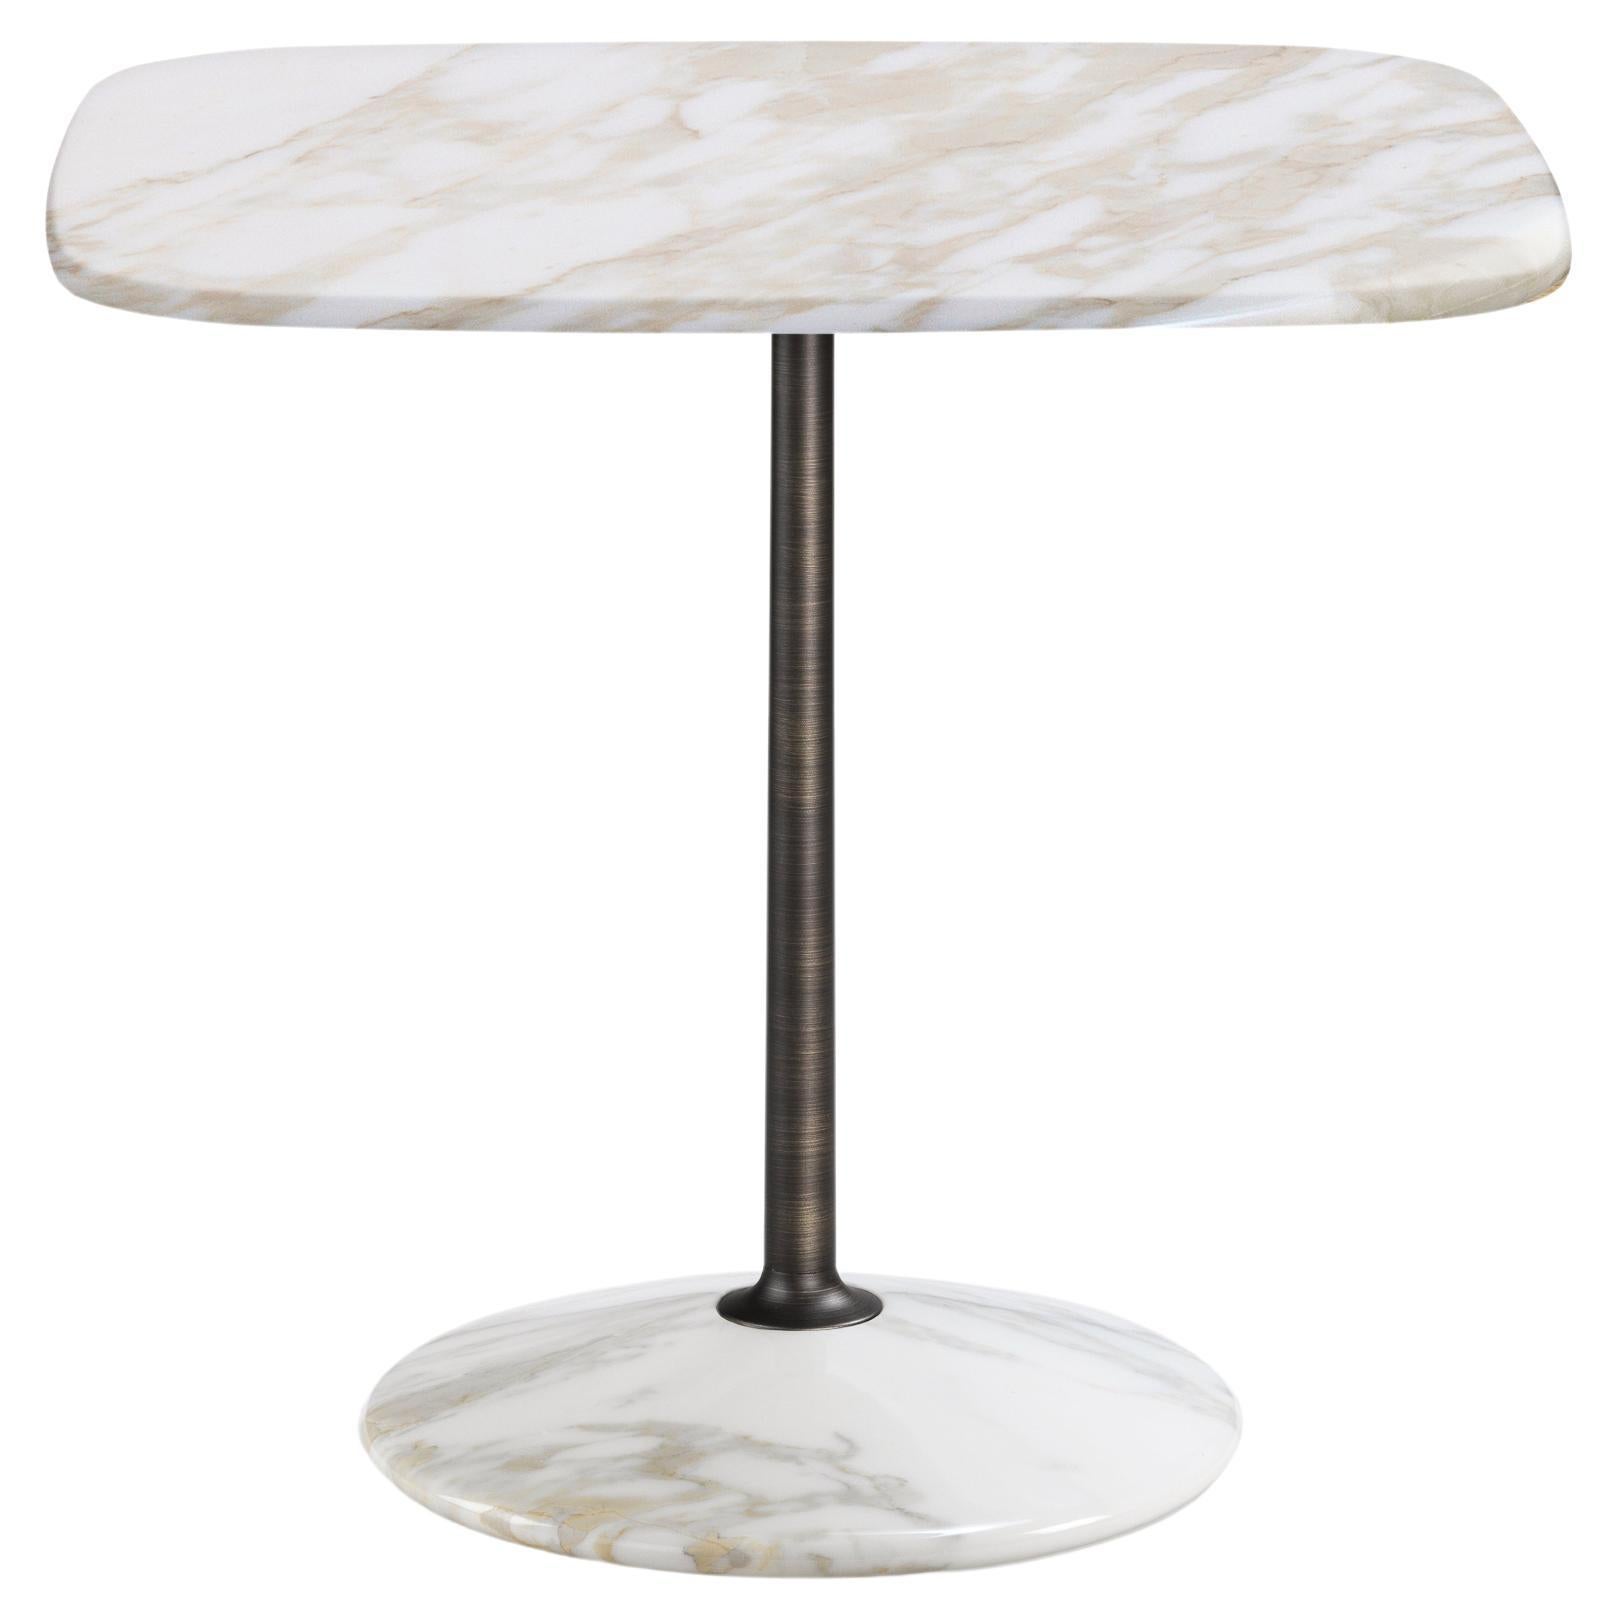 Arnold Short Table, Calacatta Gold Top, Burnished Brass Structure, Made in Italy For Sale